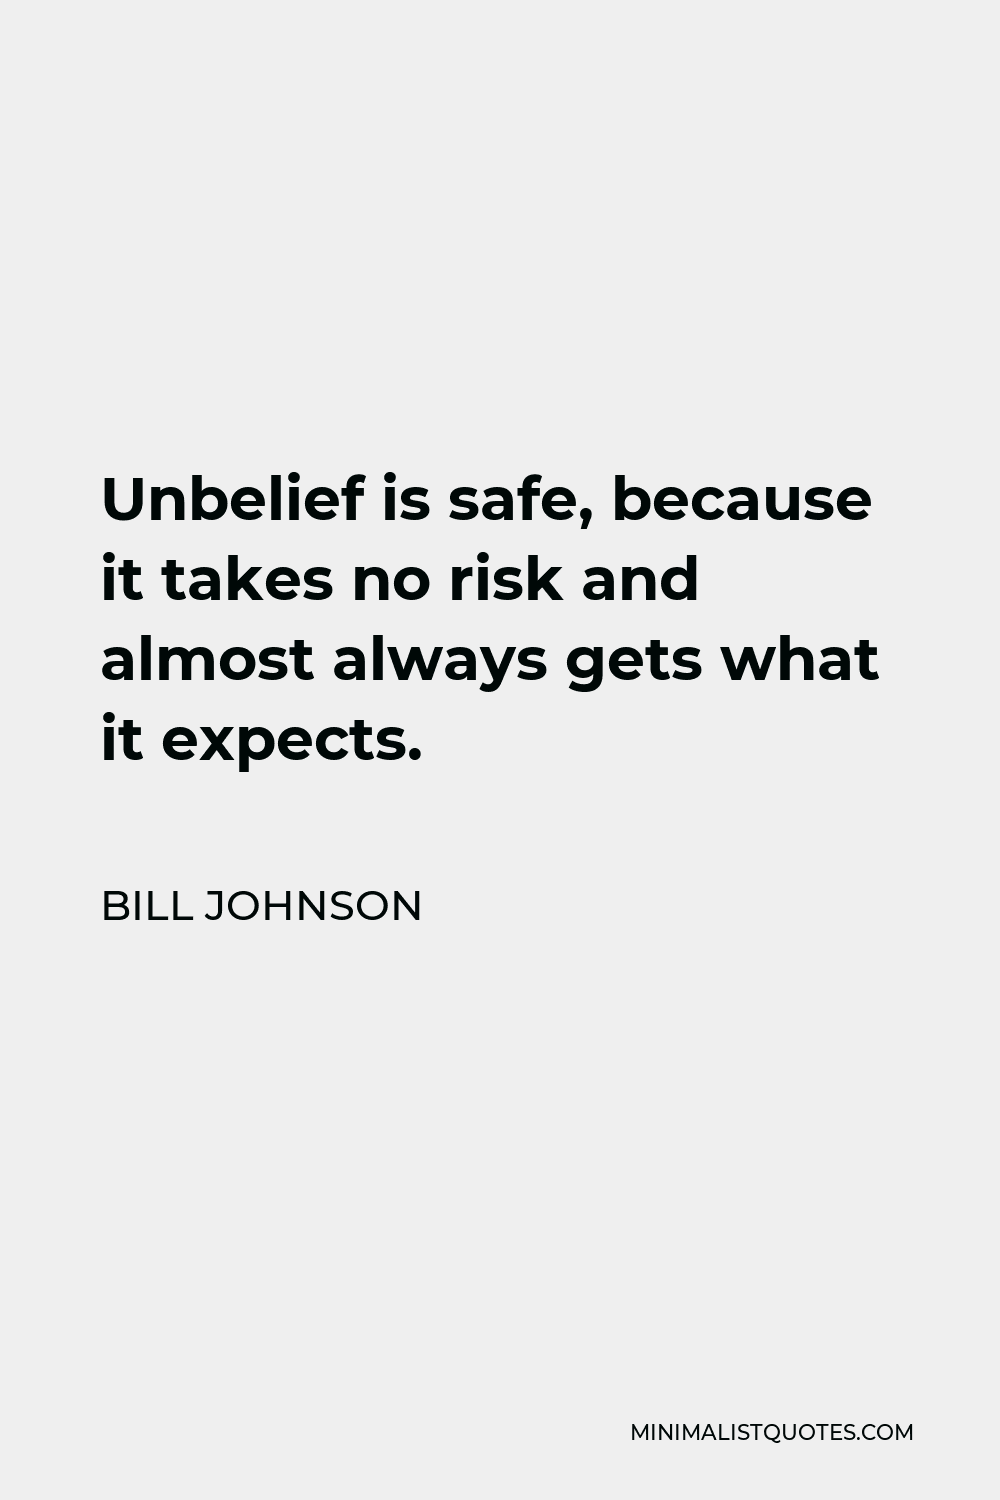 Bill Johnson Quote - Unbelief is safe, because it takes no risk and almost always gets what it expects.